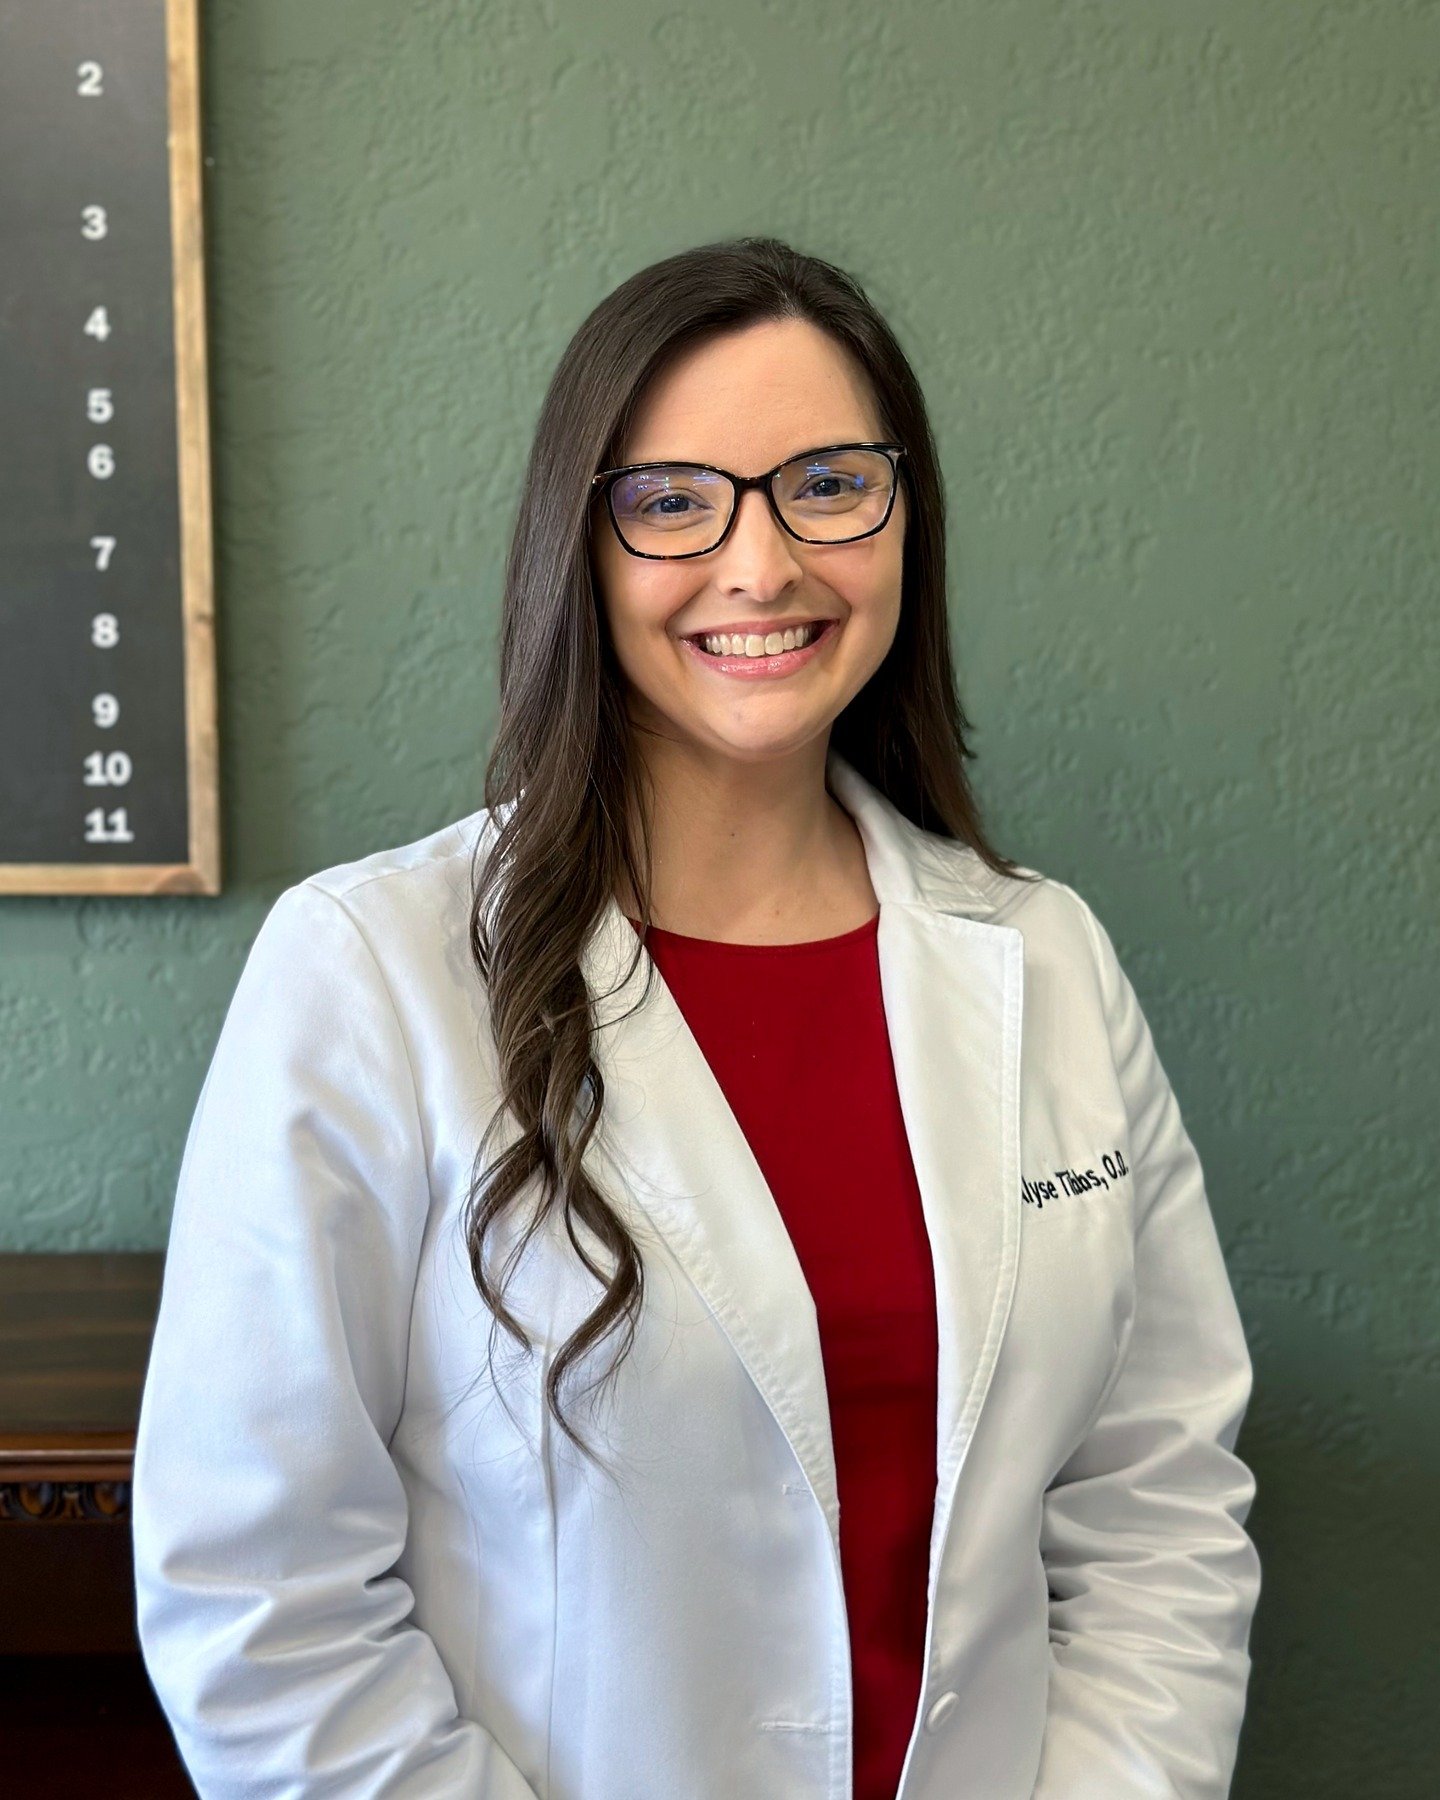 If you've been in the office lately you'd probably gotten a chance to meet our newest doctor, Dr. J. Alyse Allen-Tibbs to our team!!

She has resided in the East Texas area the majority of her life. She participated in the dual-credit program offered